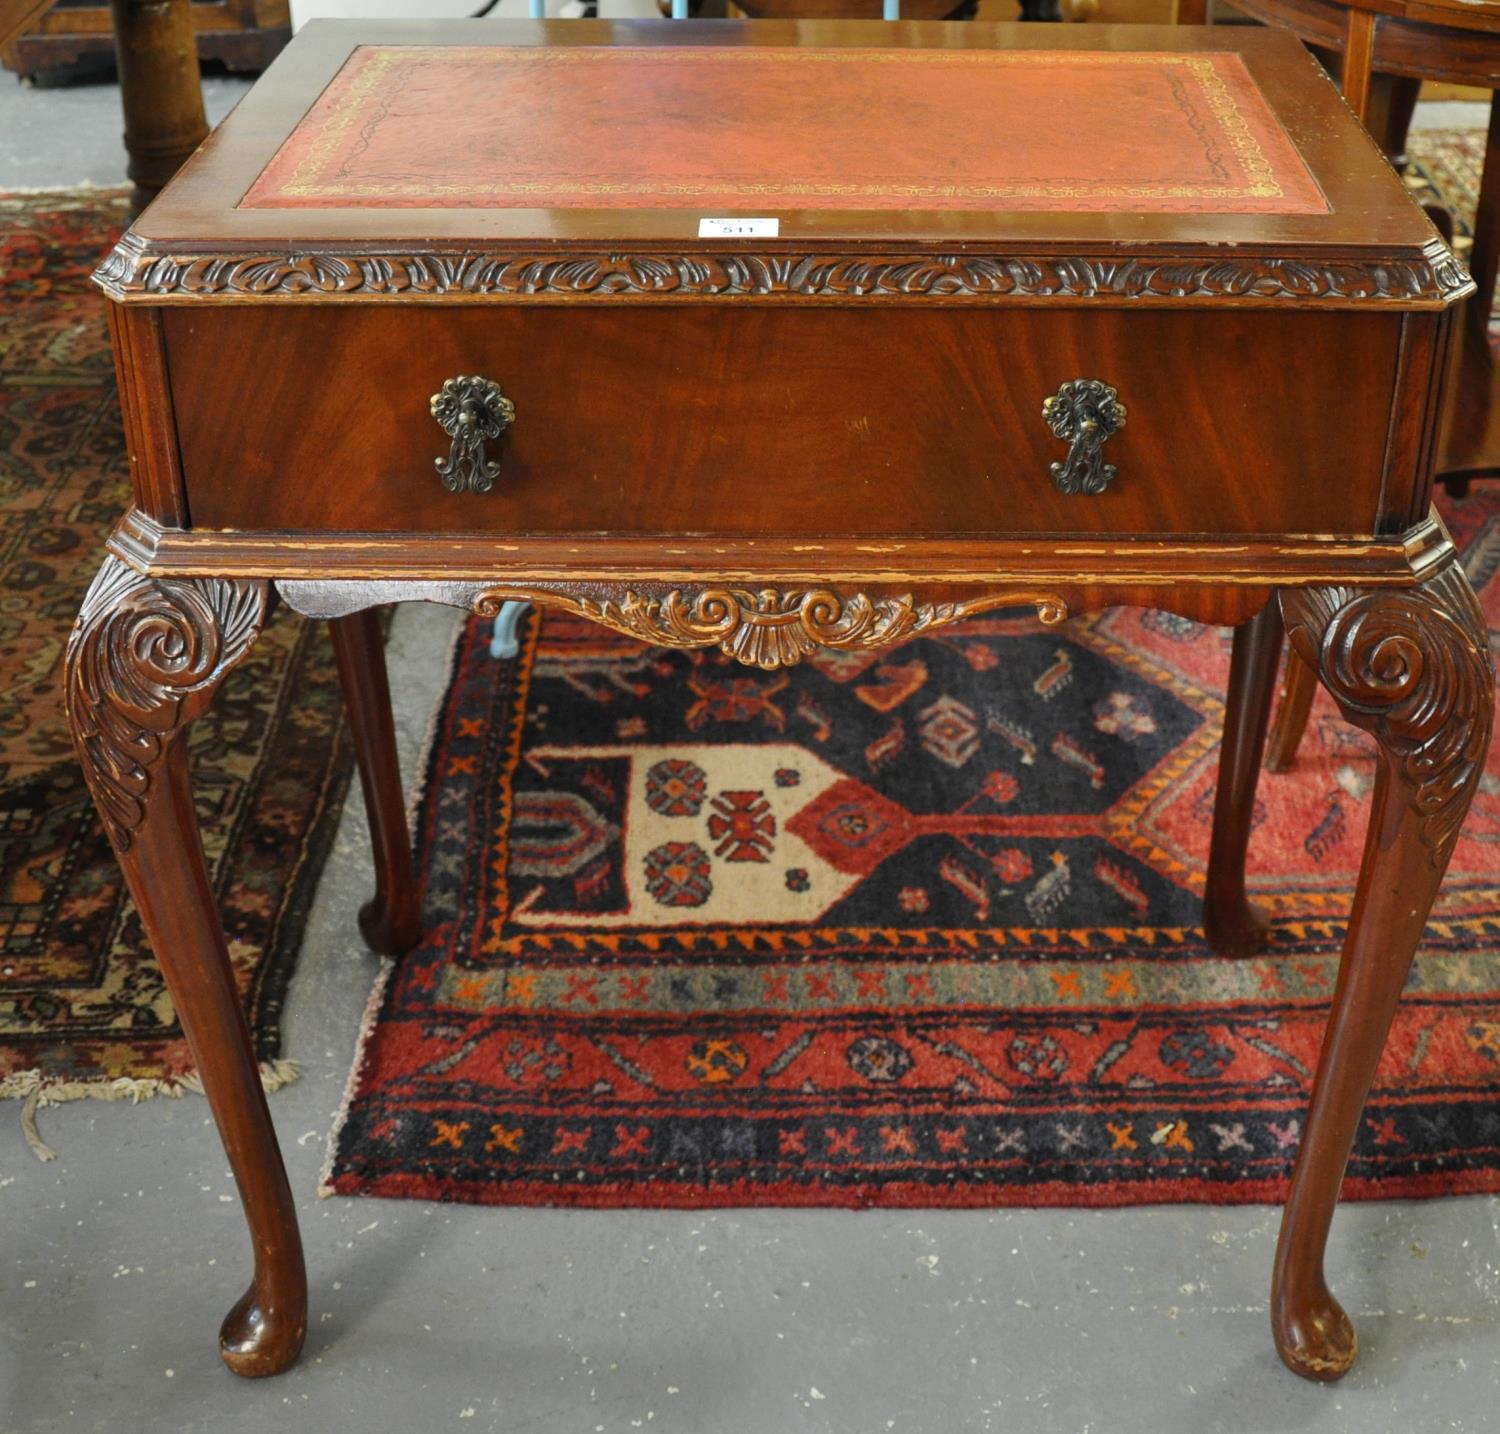 Reproduction mahogany writing desk with leather insert top above single pull-out drawer on